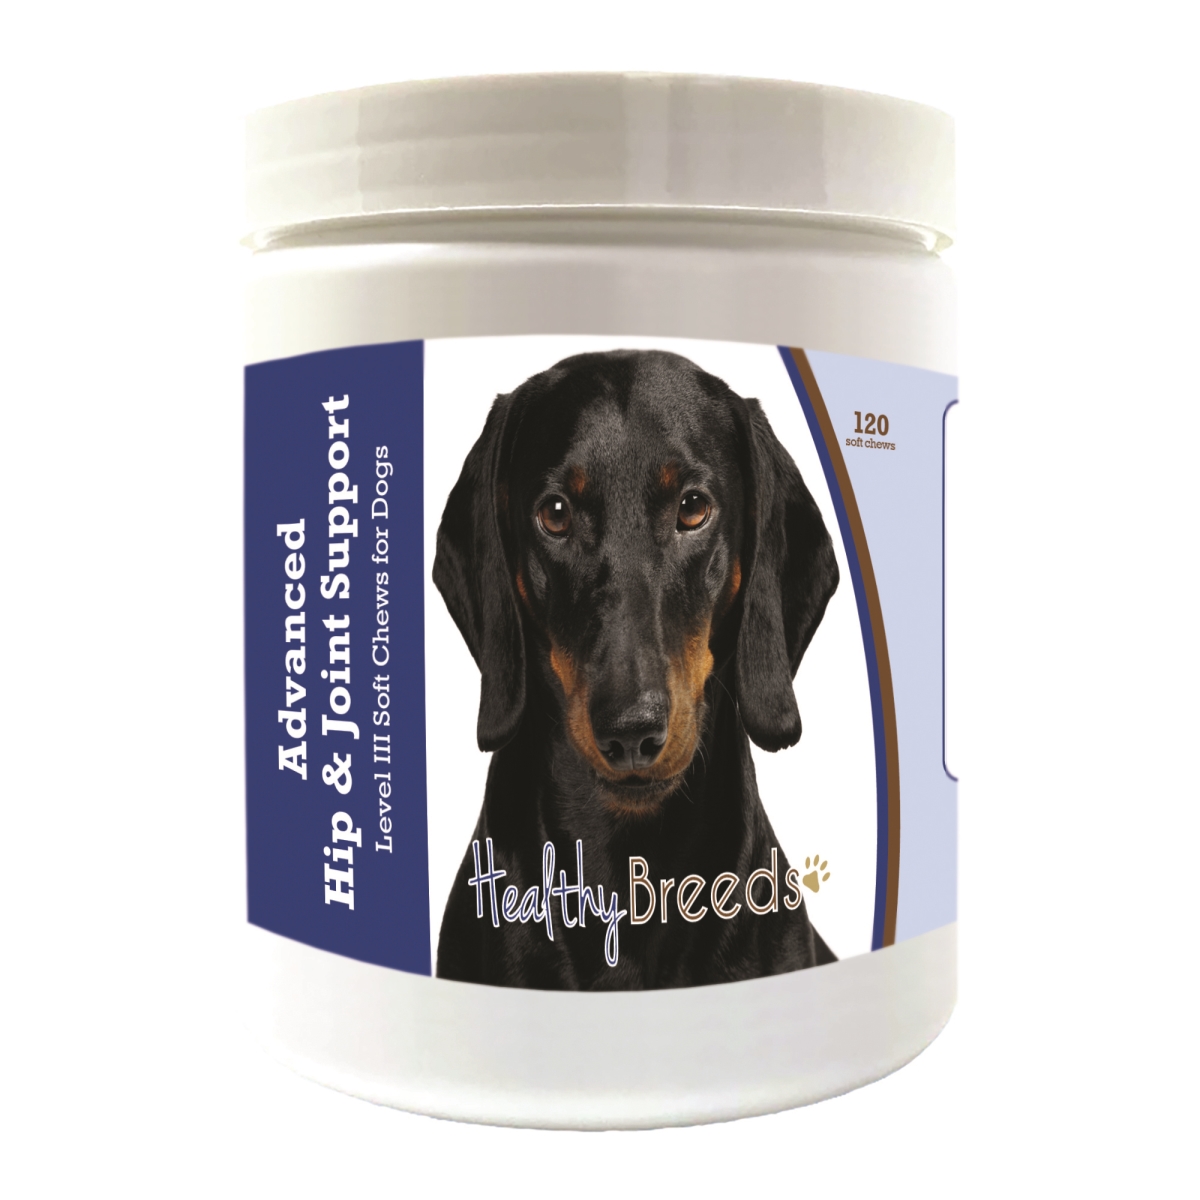 Picture of Healthy Breeds 192959898064 Dachshund Advanced Hip & Joint Support Level III Soft Chews for Dogs